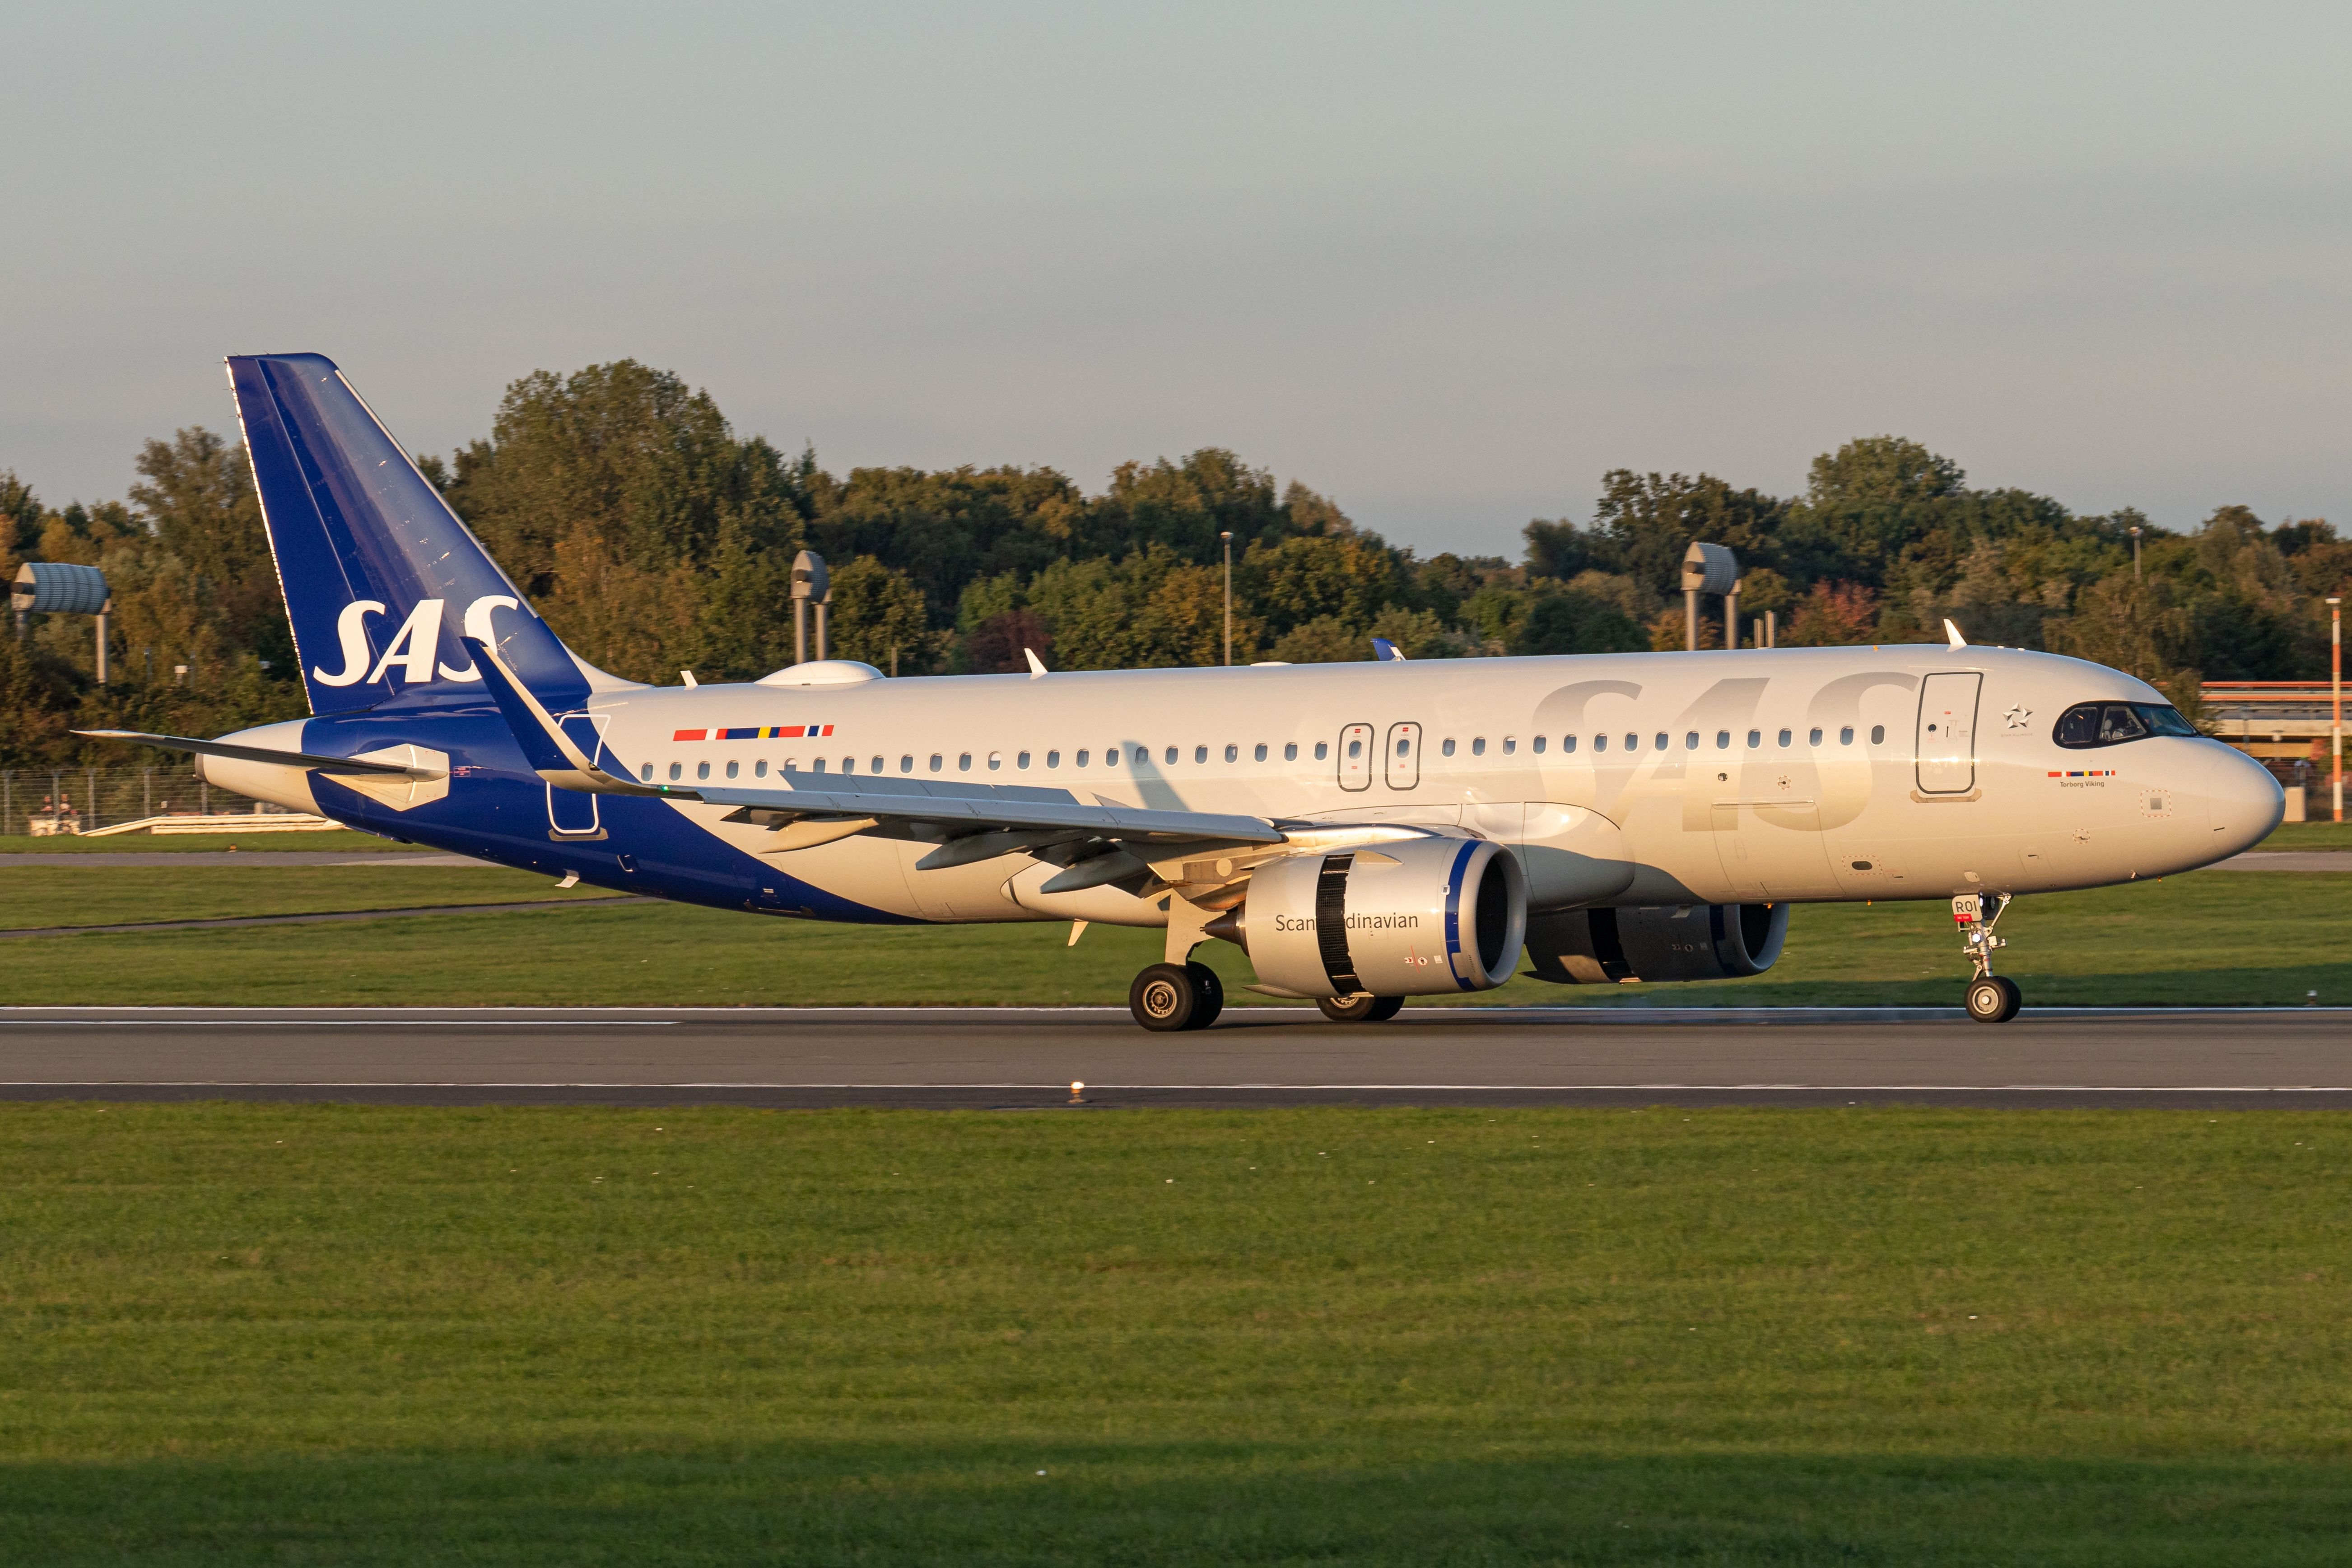 An SAS Airbus A320neo on the runway.